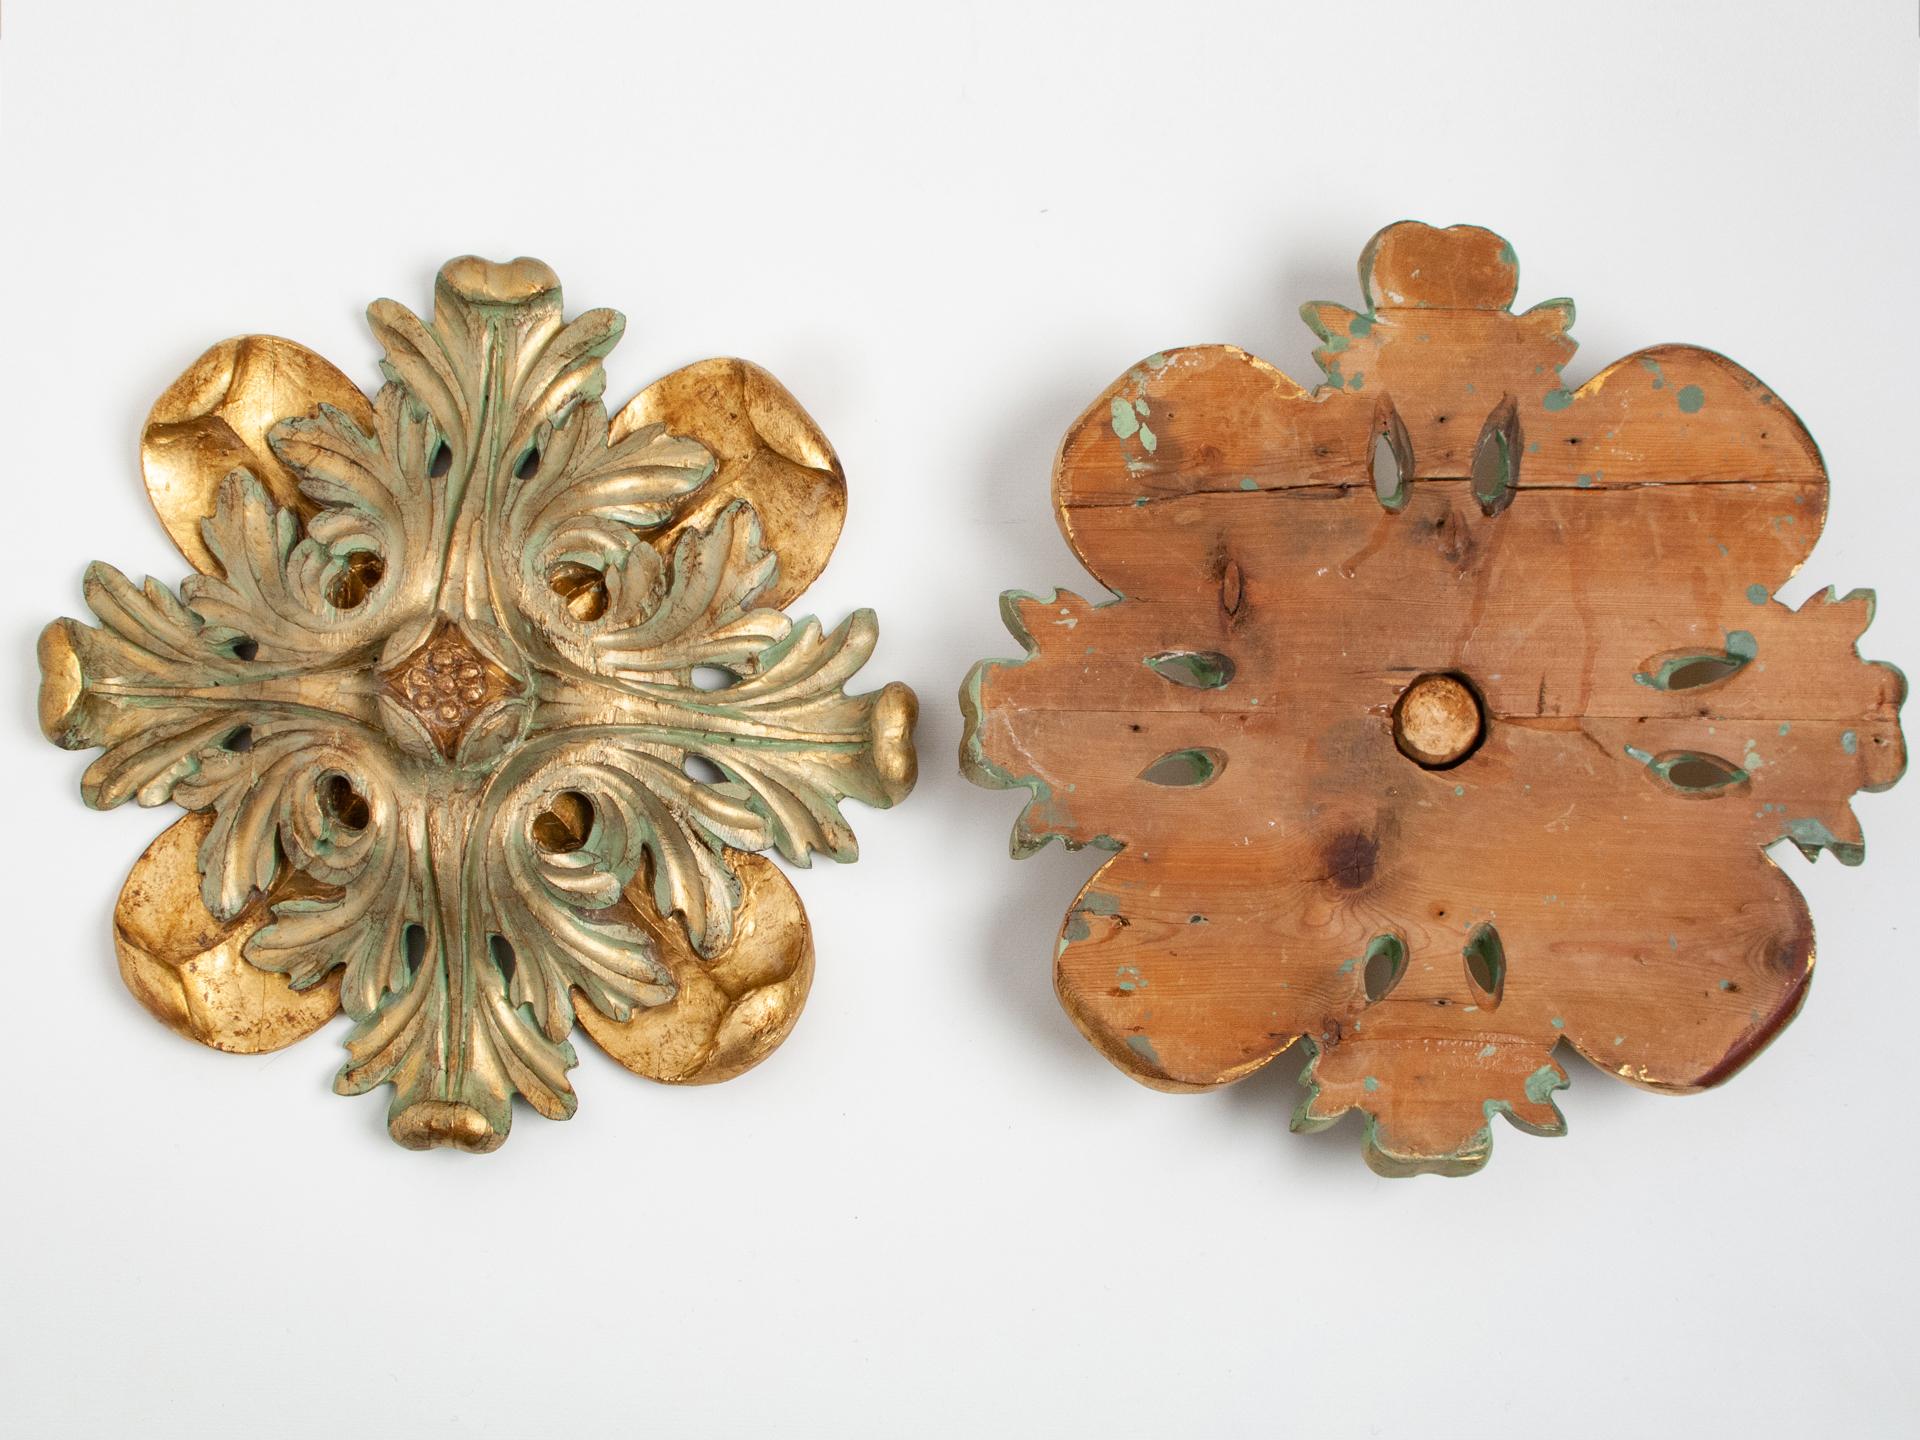 Pair of antique friezes carved in wood and lacquered pale green and gold leaf.
When I found them, I was struck by the sculpture work, but they had lost some parts of color. For many years I left them on the sidelines, then I decided to bring them